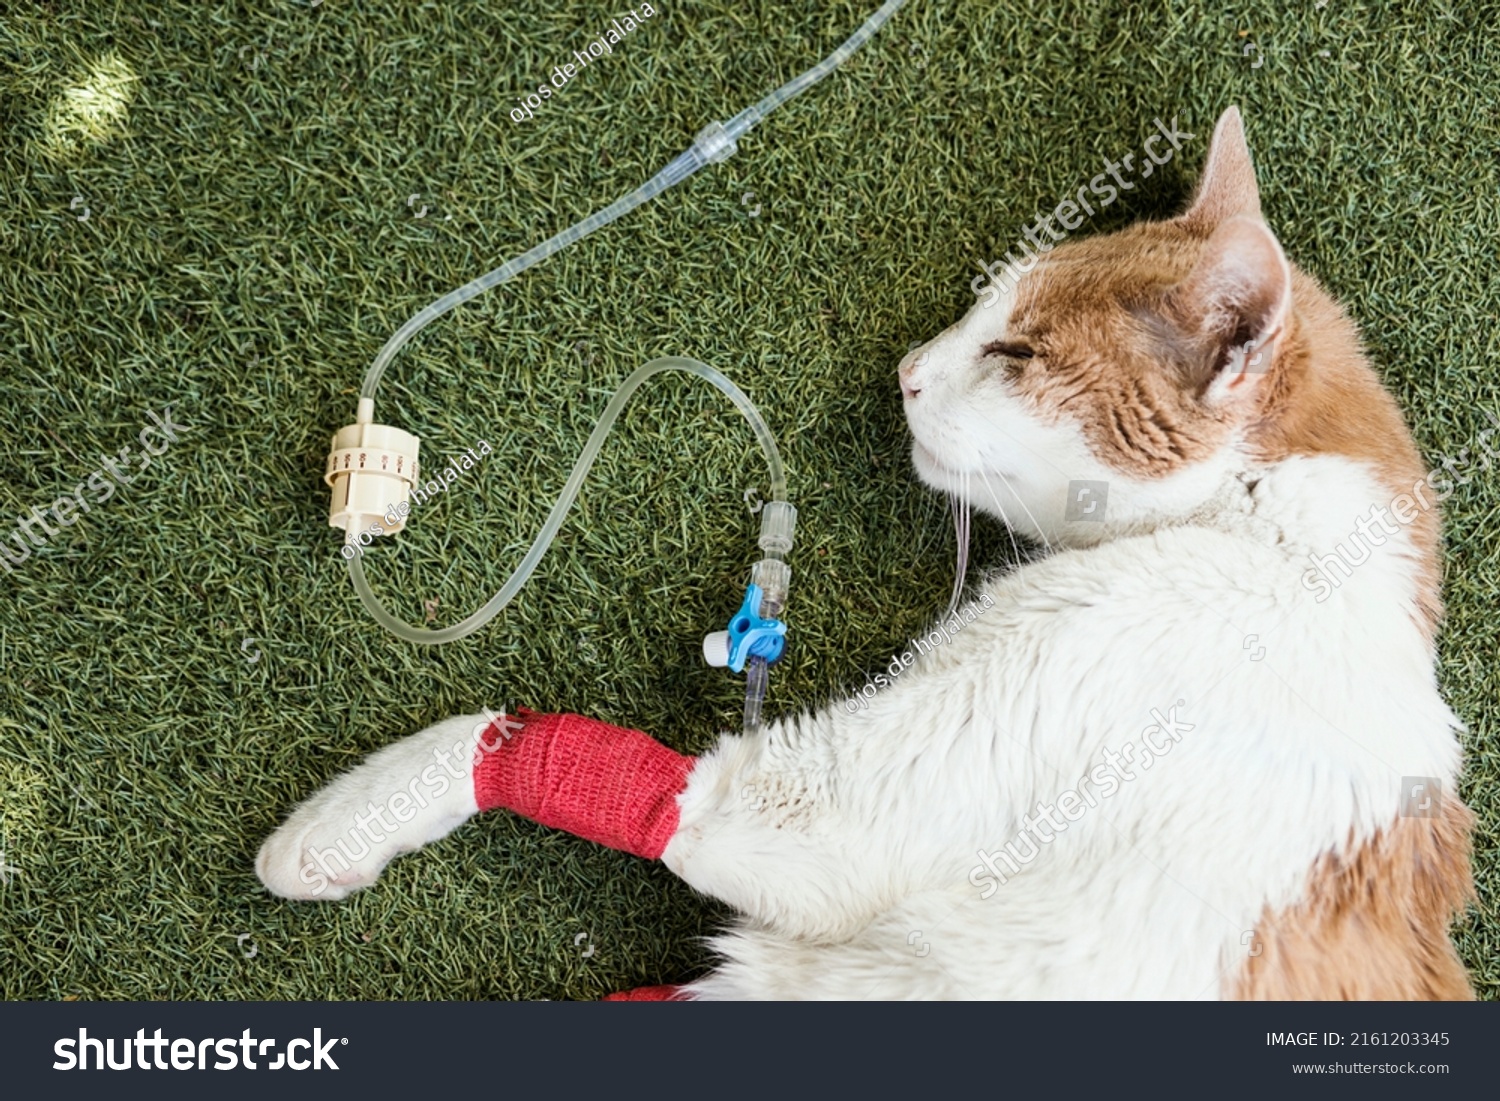 Sick cat with serum by catheter with bandages. Sick cat due to treatment for kidney failure. Indisposed cat, serious, convalescent, afflicted. Concept of cat or mascot convalescent by operation. Sick #2161203345